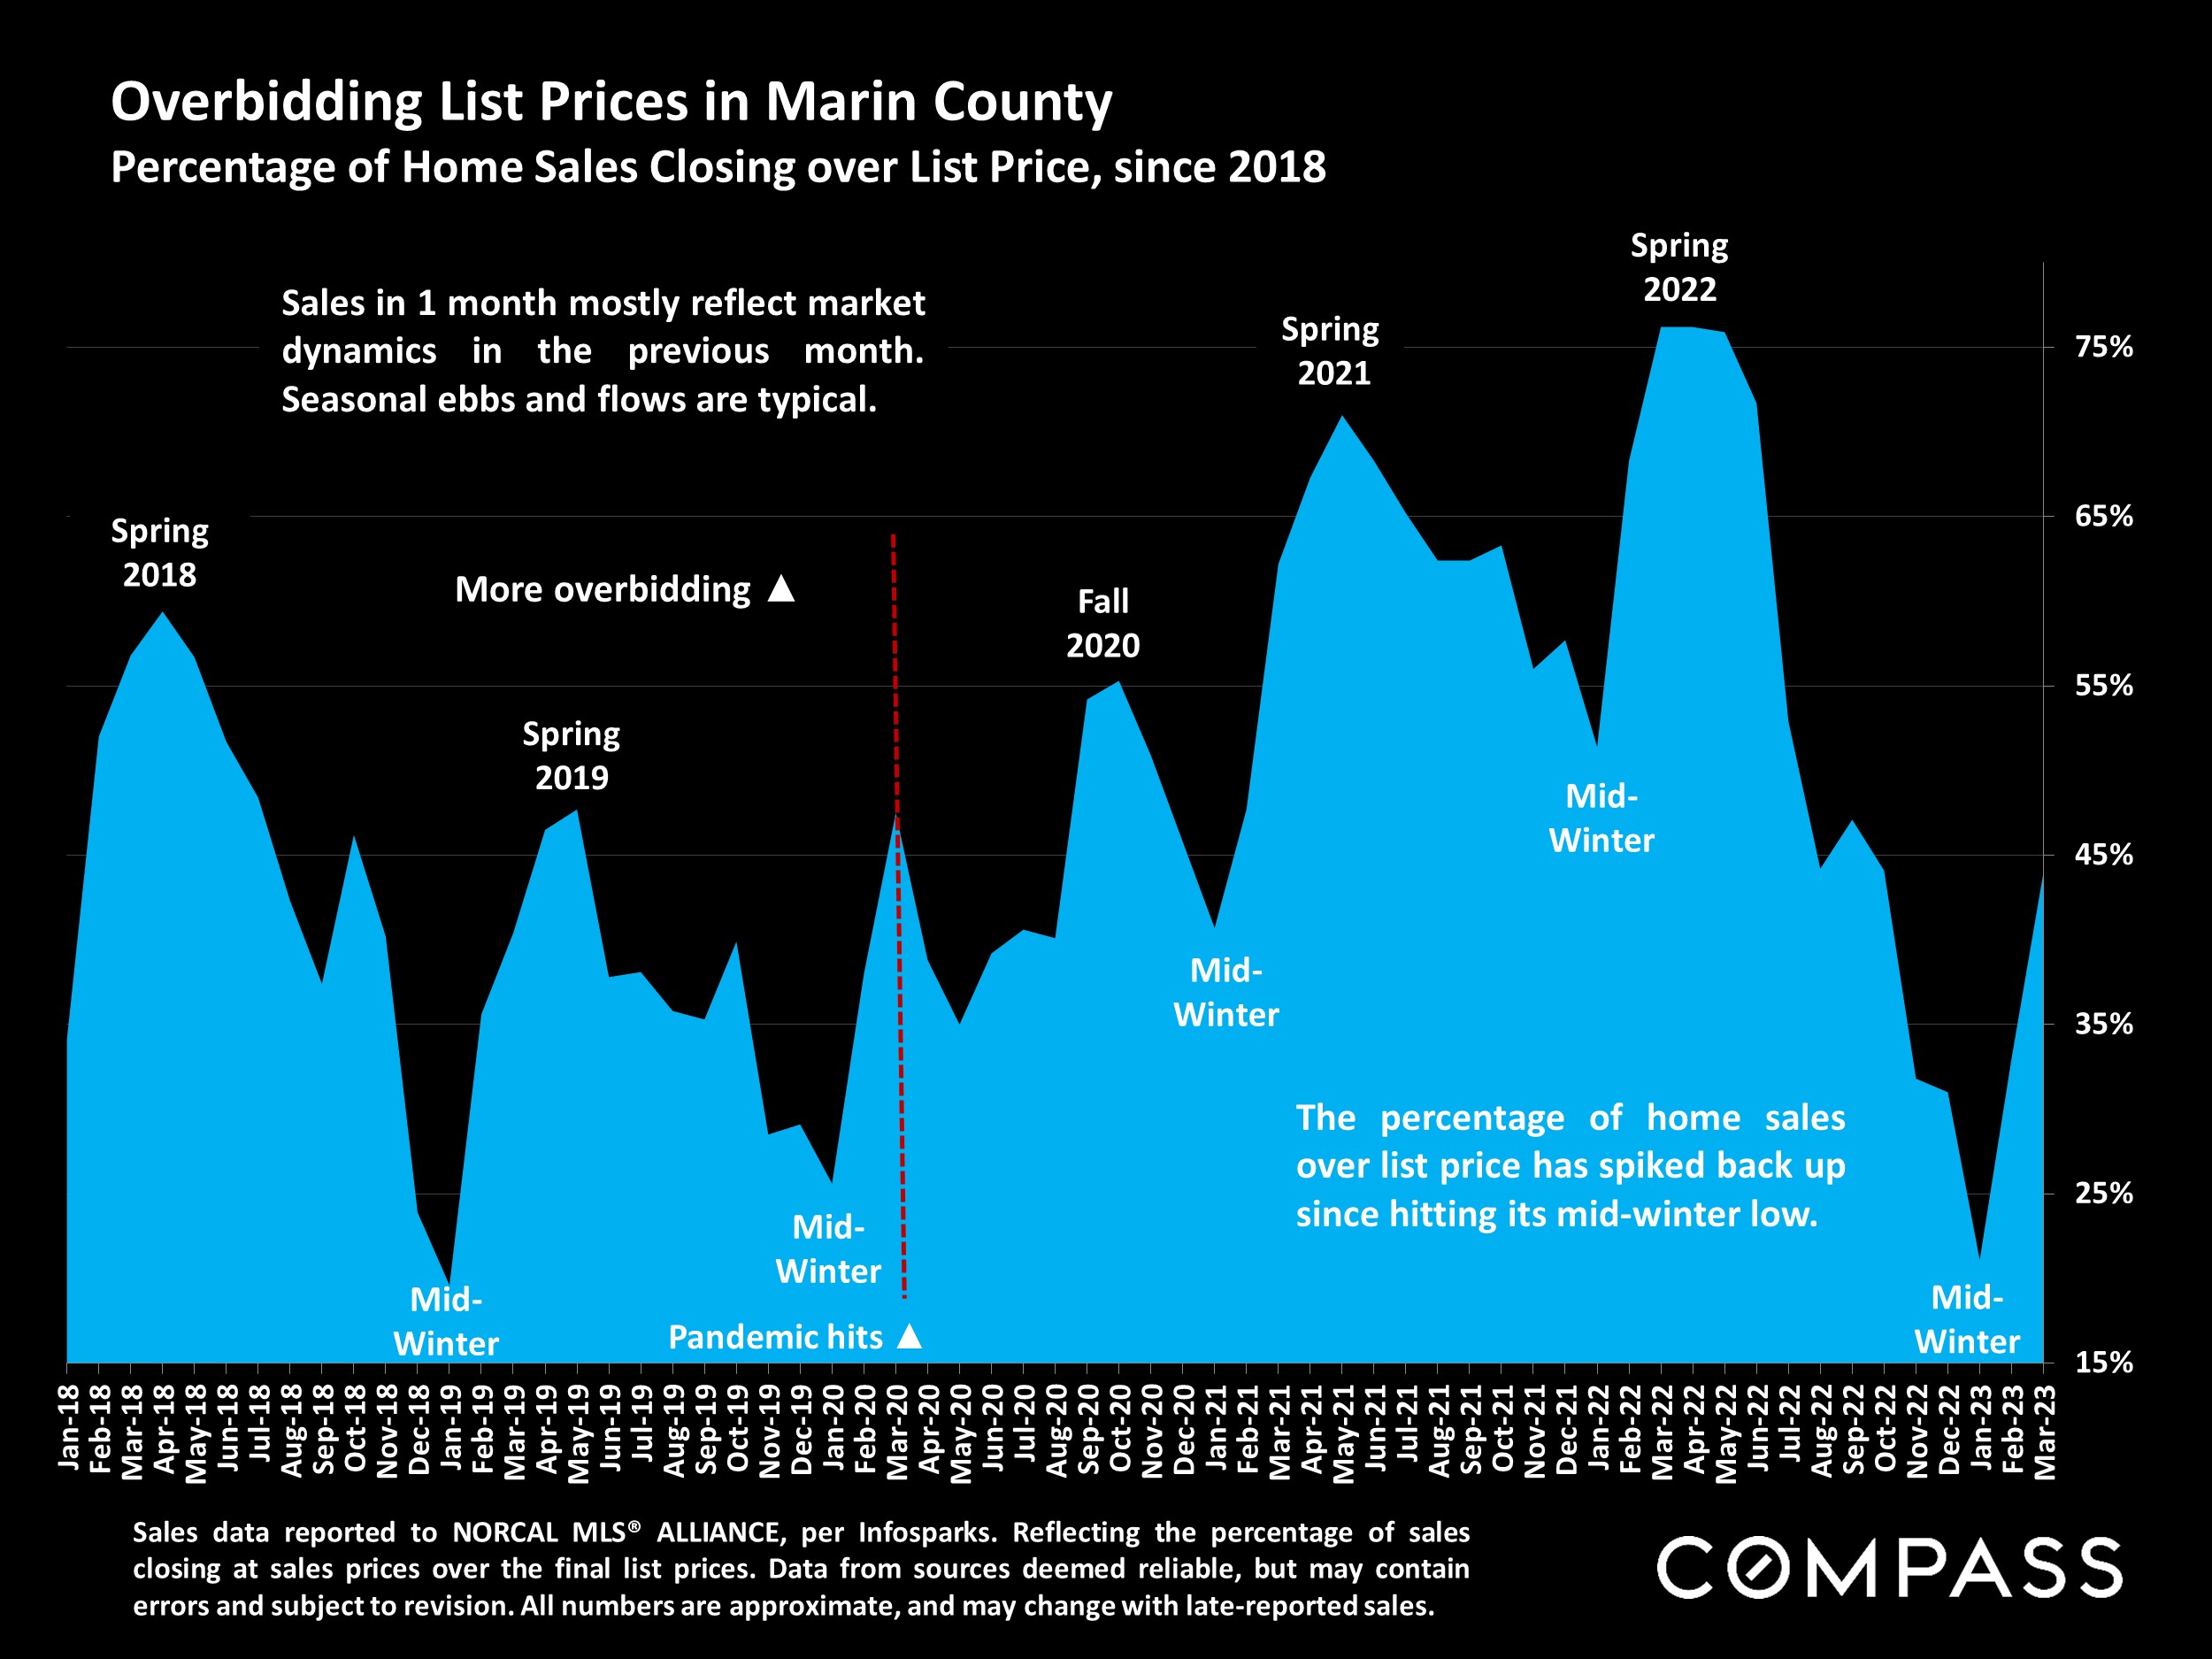 Overbidding List Prices in Marin County